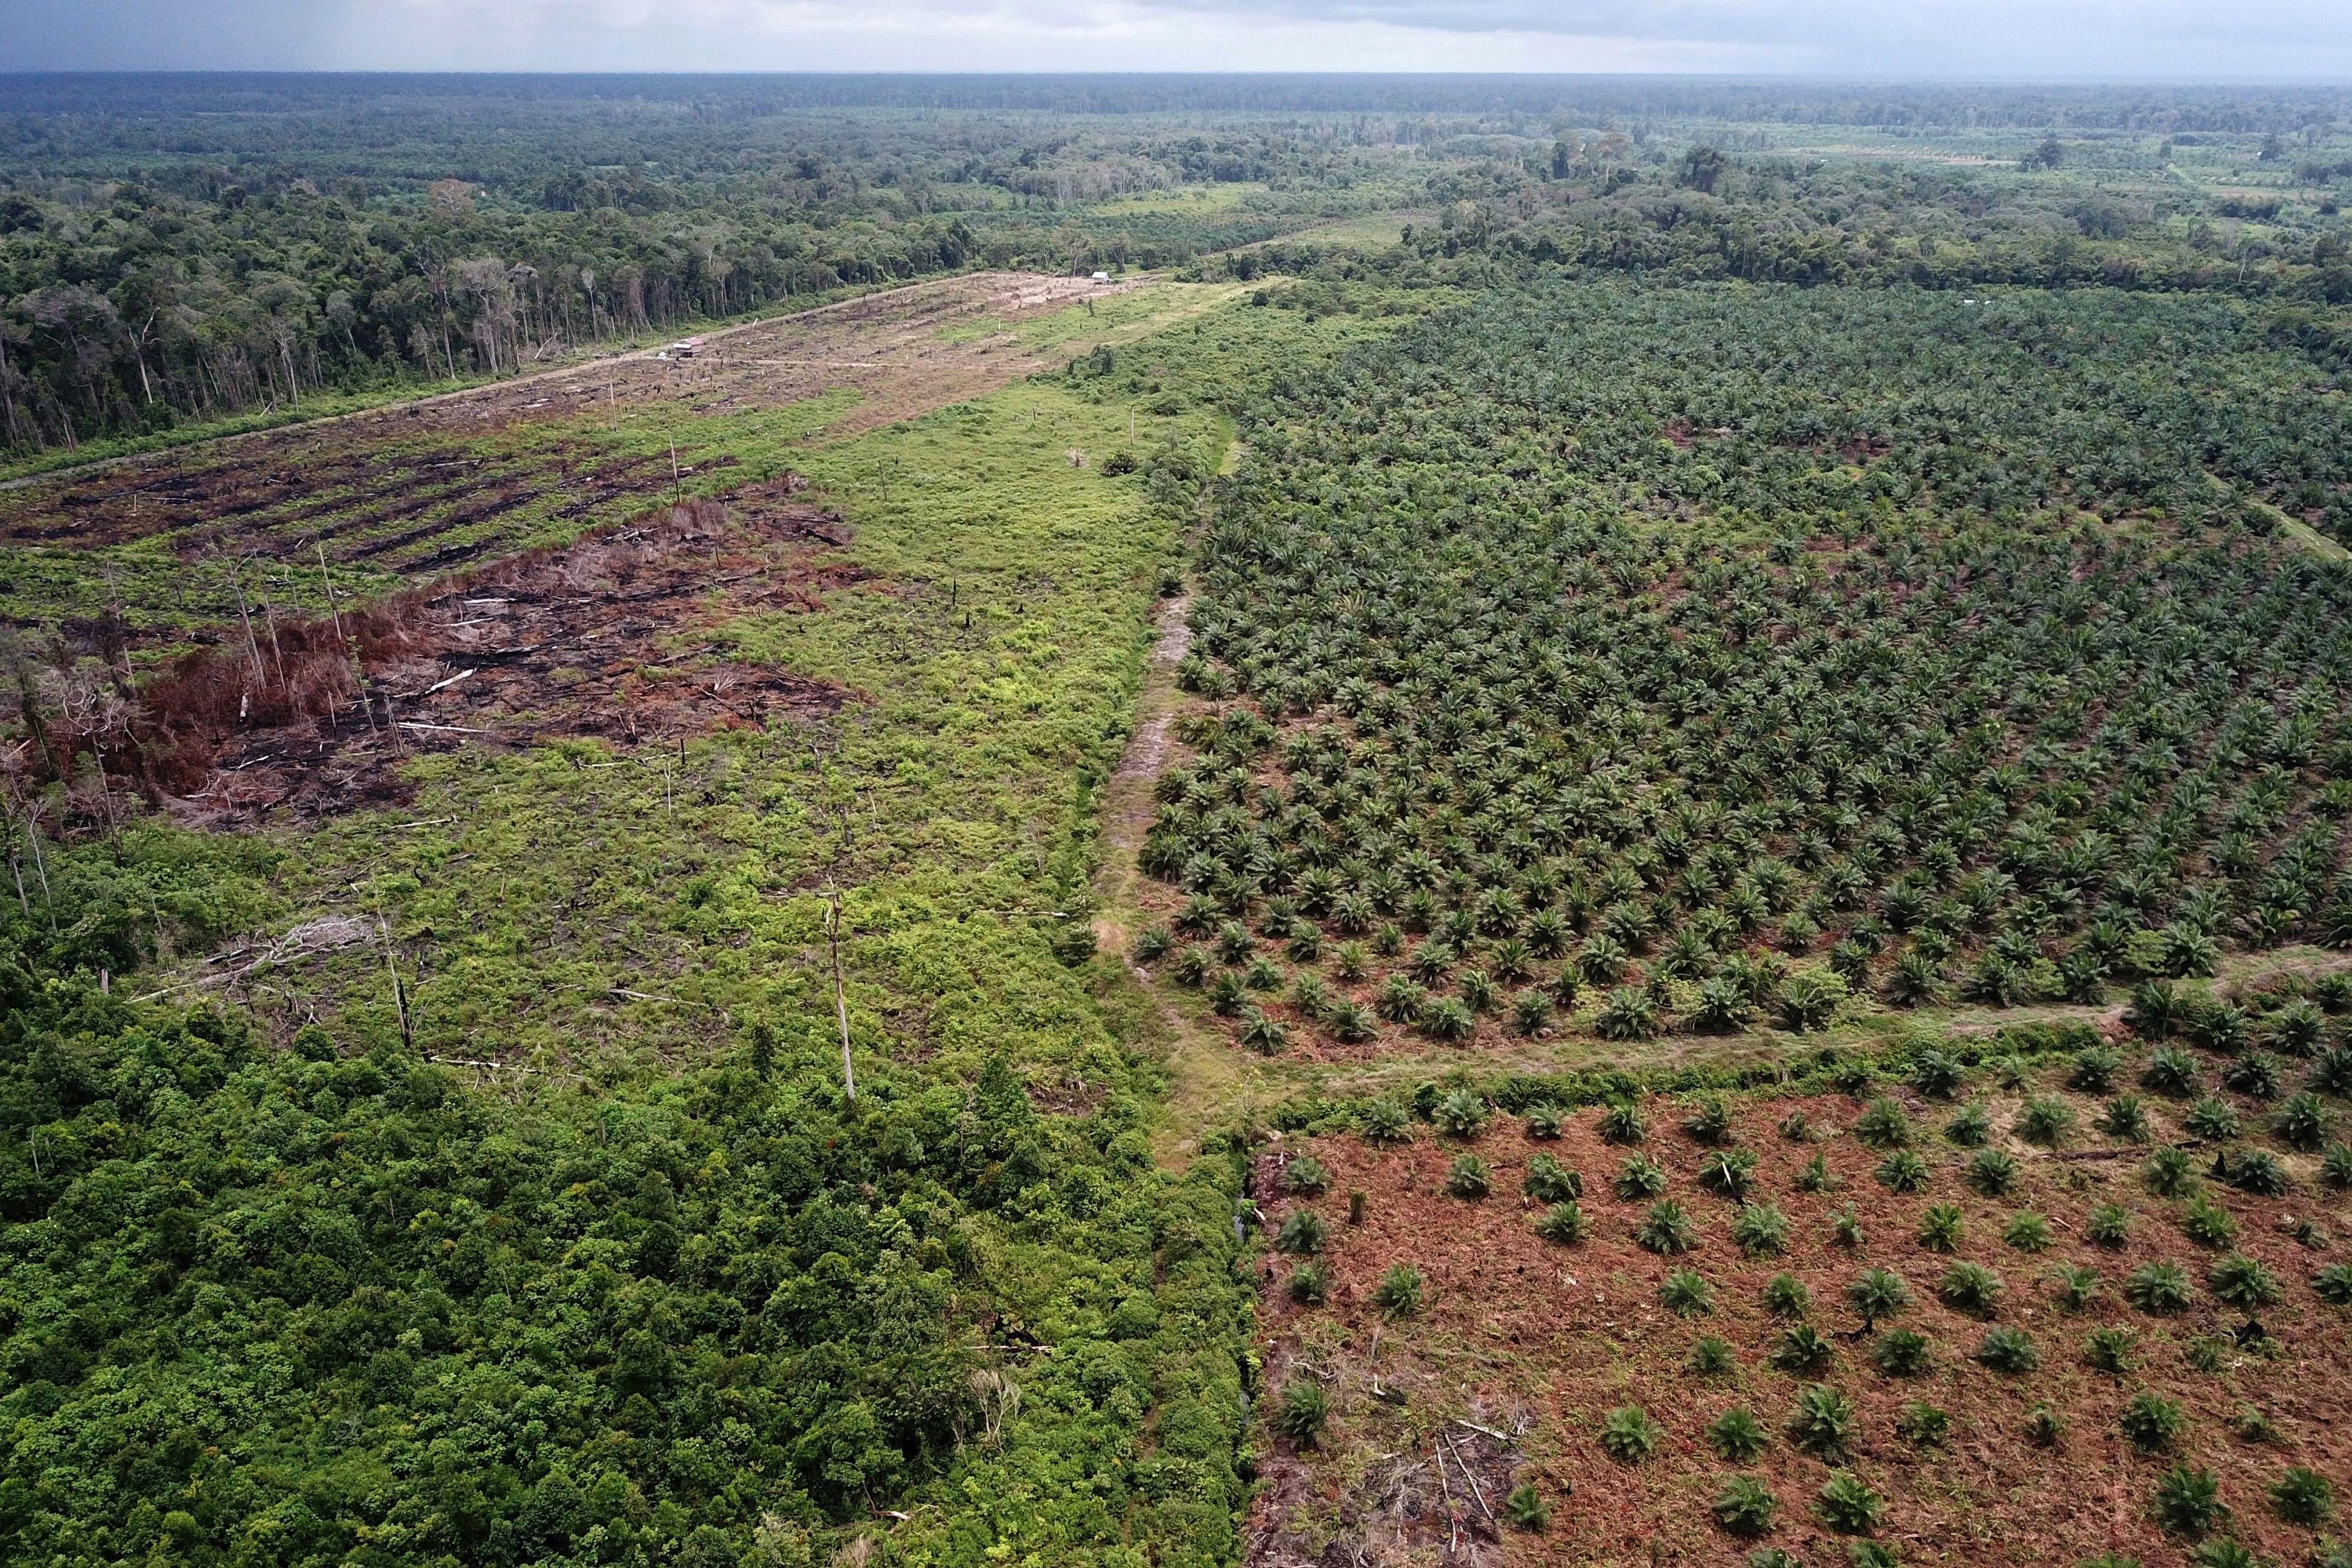 This aerial photo taken on March 3, 2018 shows a palm oil plantation in a protected area of the Rawa Singkil Wildlife Reserve on the Indonesian island of Sumatra.